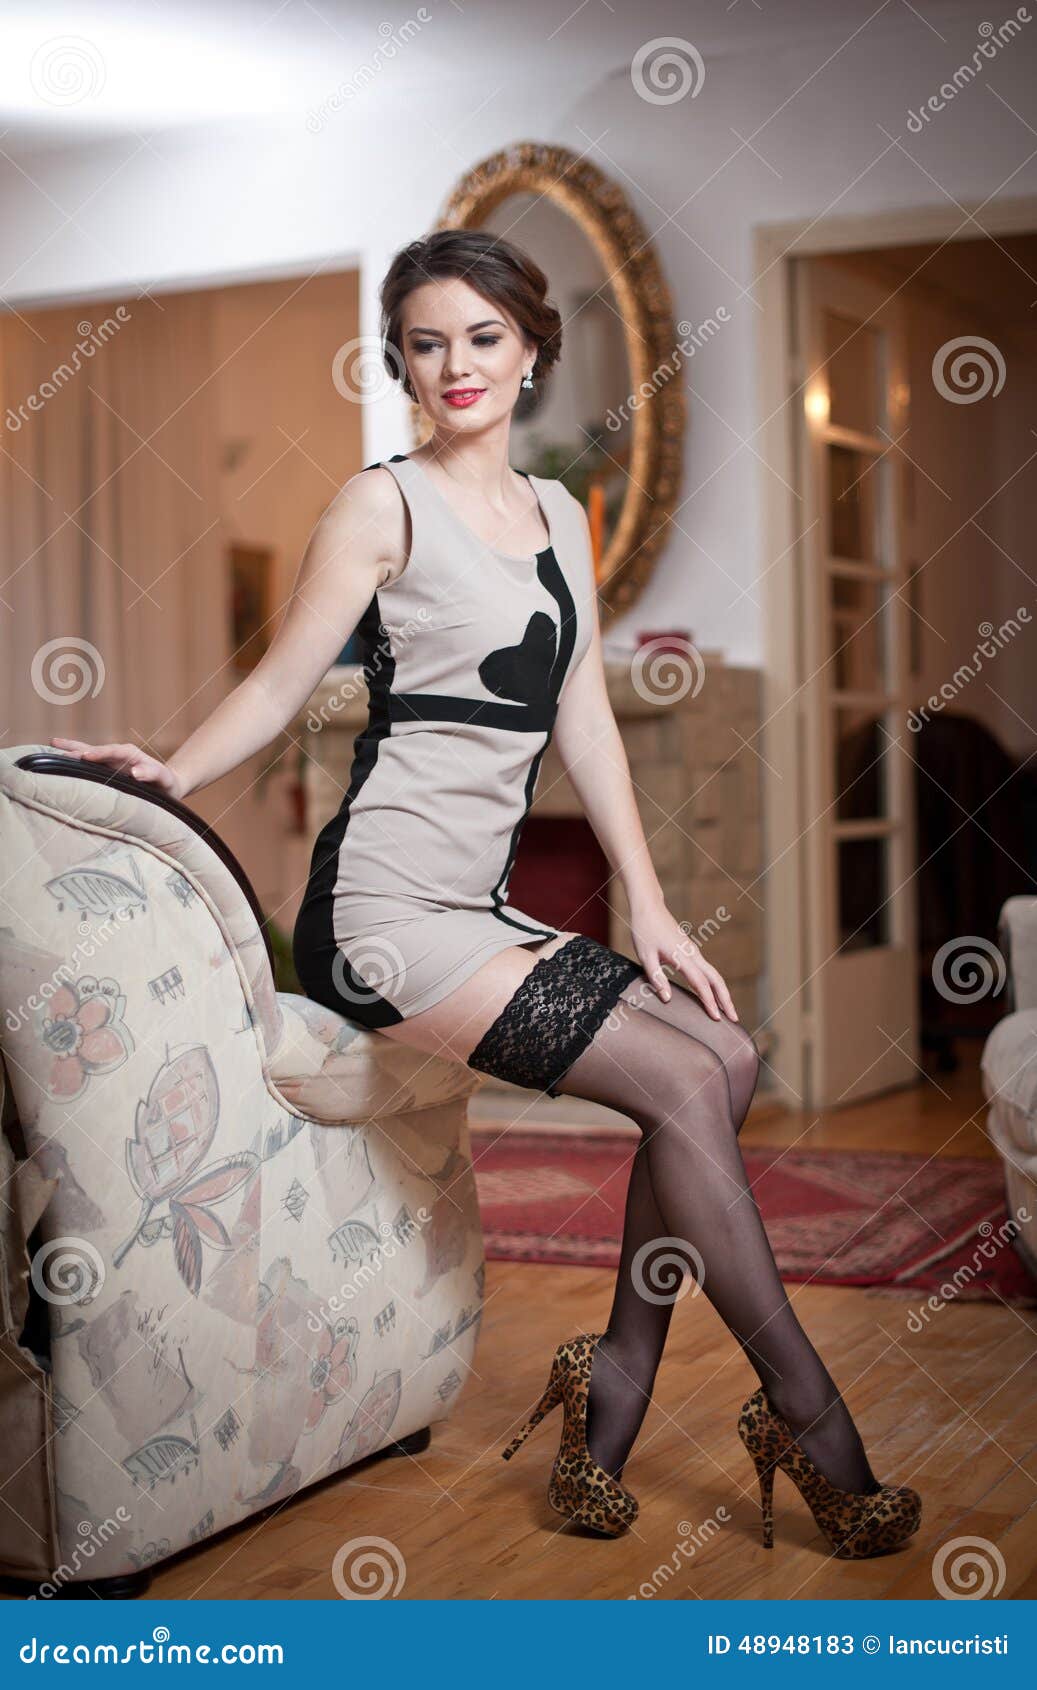 Mature stocking free Happy Smiling Attractive Woman Wearing An Elegant Dress And Black Stockings Sitting On The Sofa Arm Beautiful Young Sensual Girl Stock Photo 48948183 Megapixl